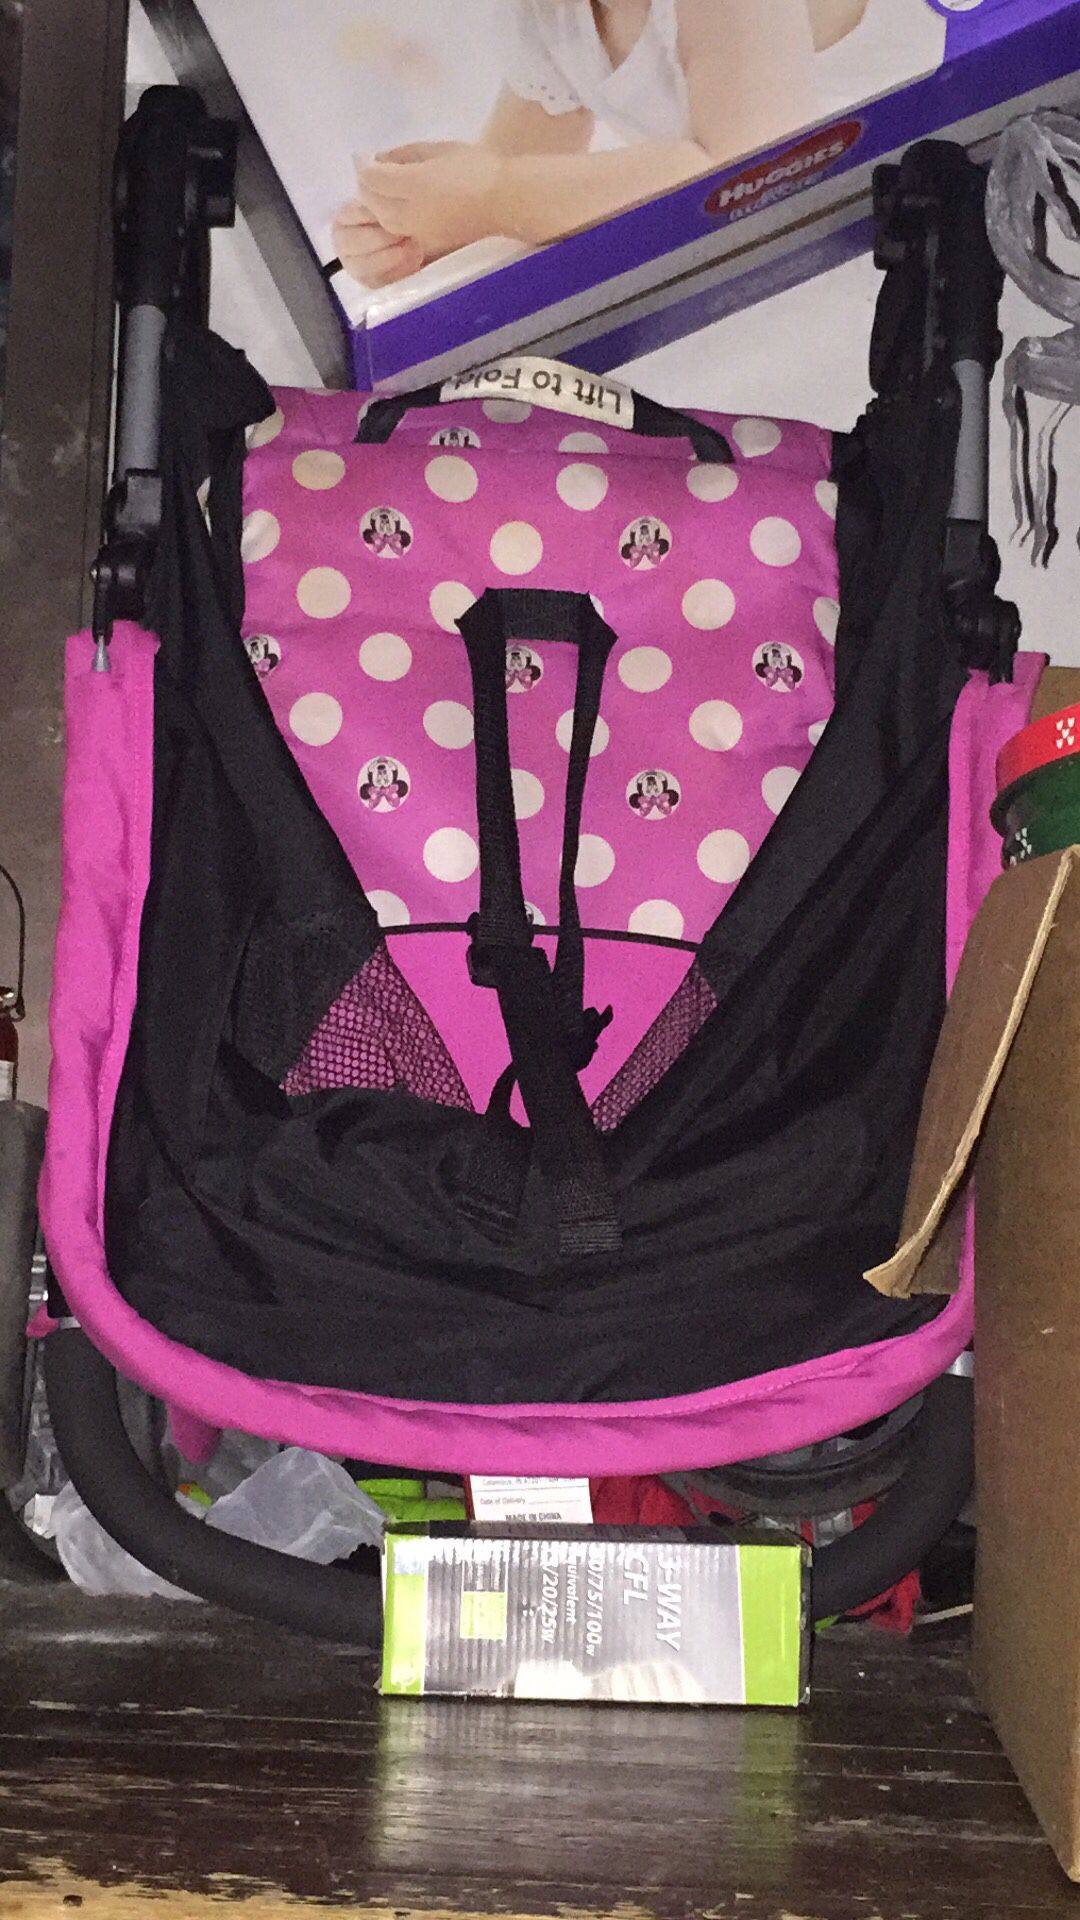 Car seat and stroller set